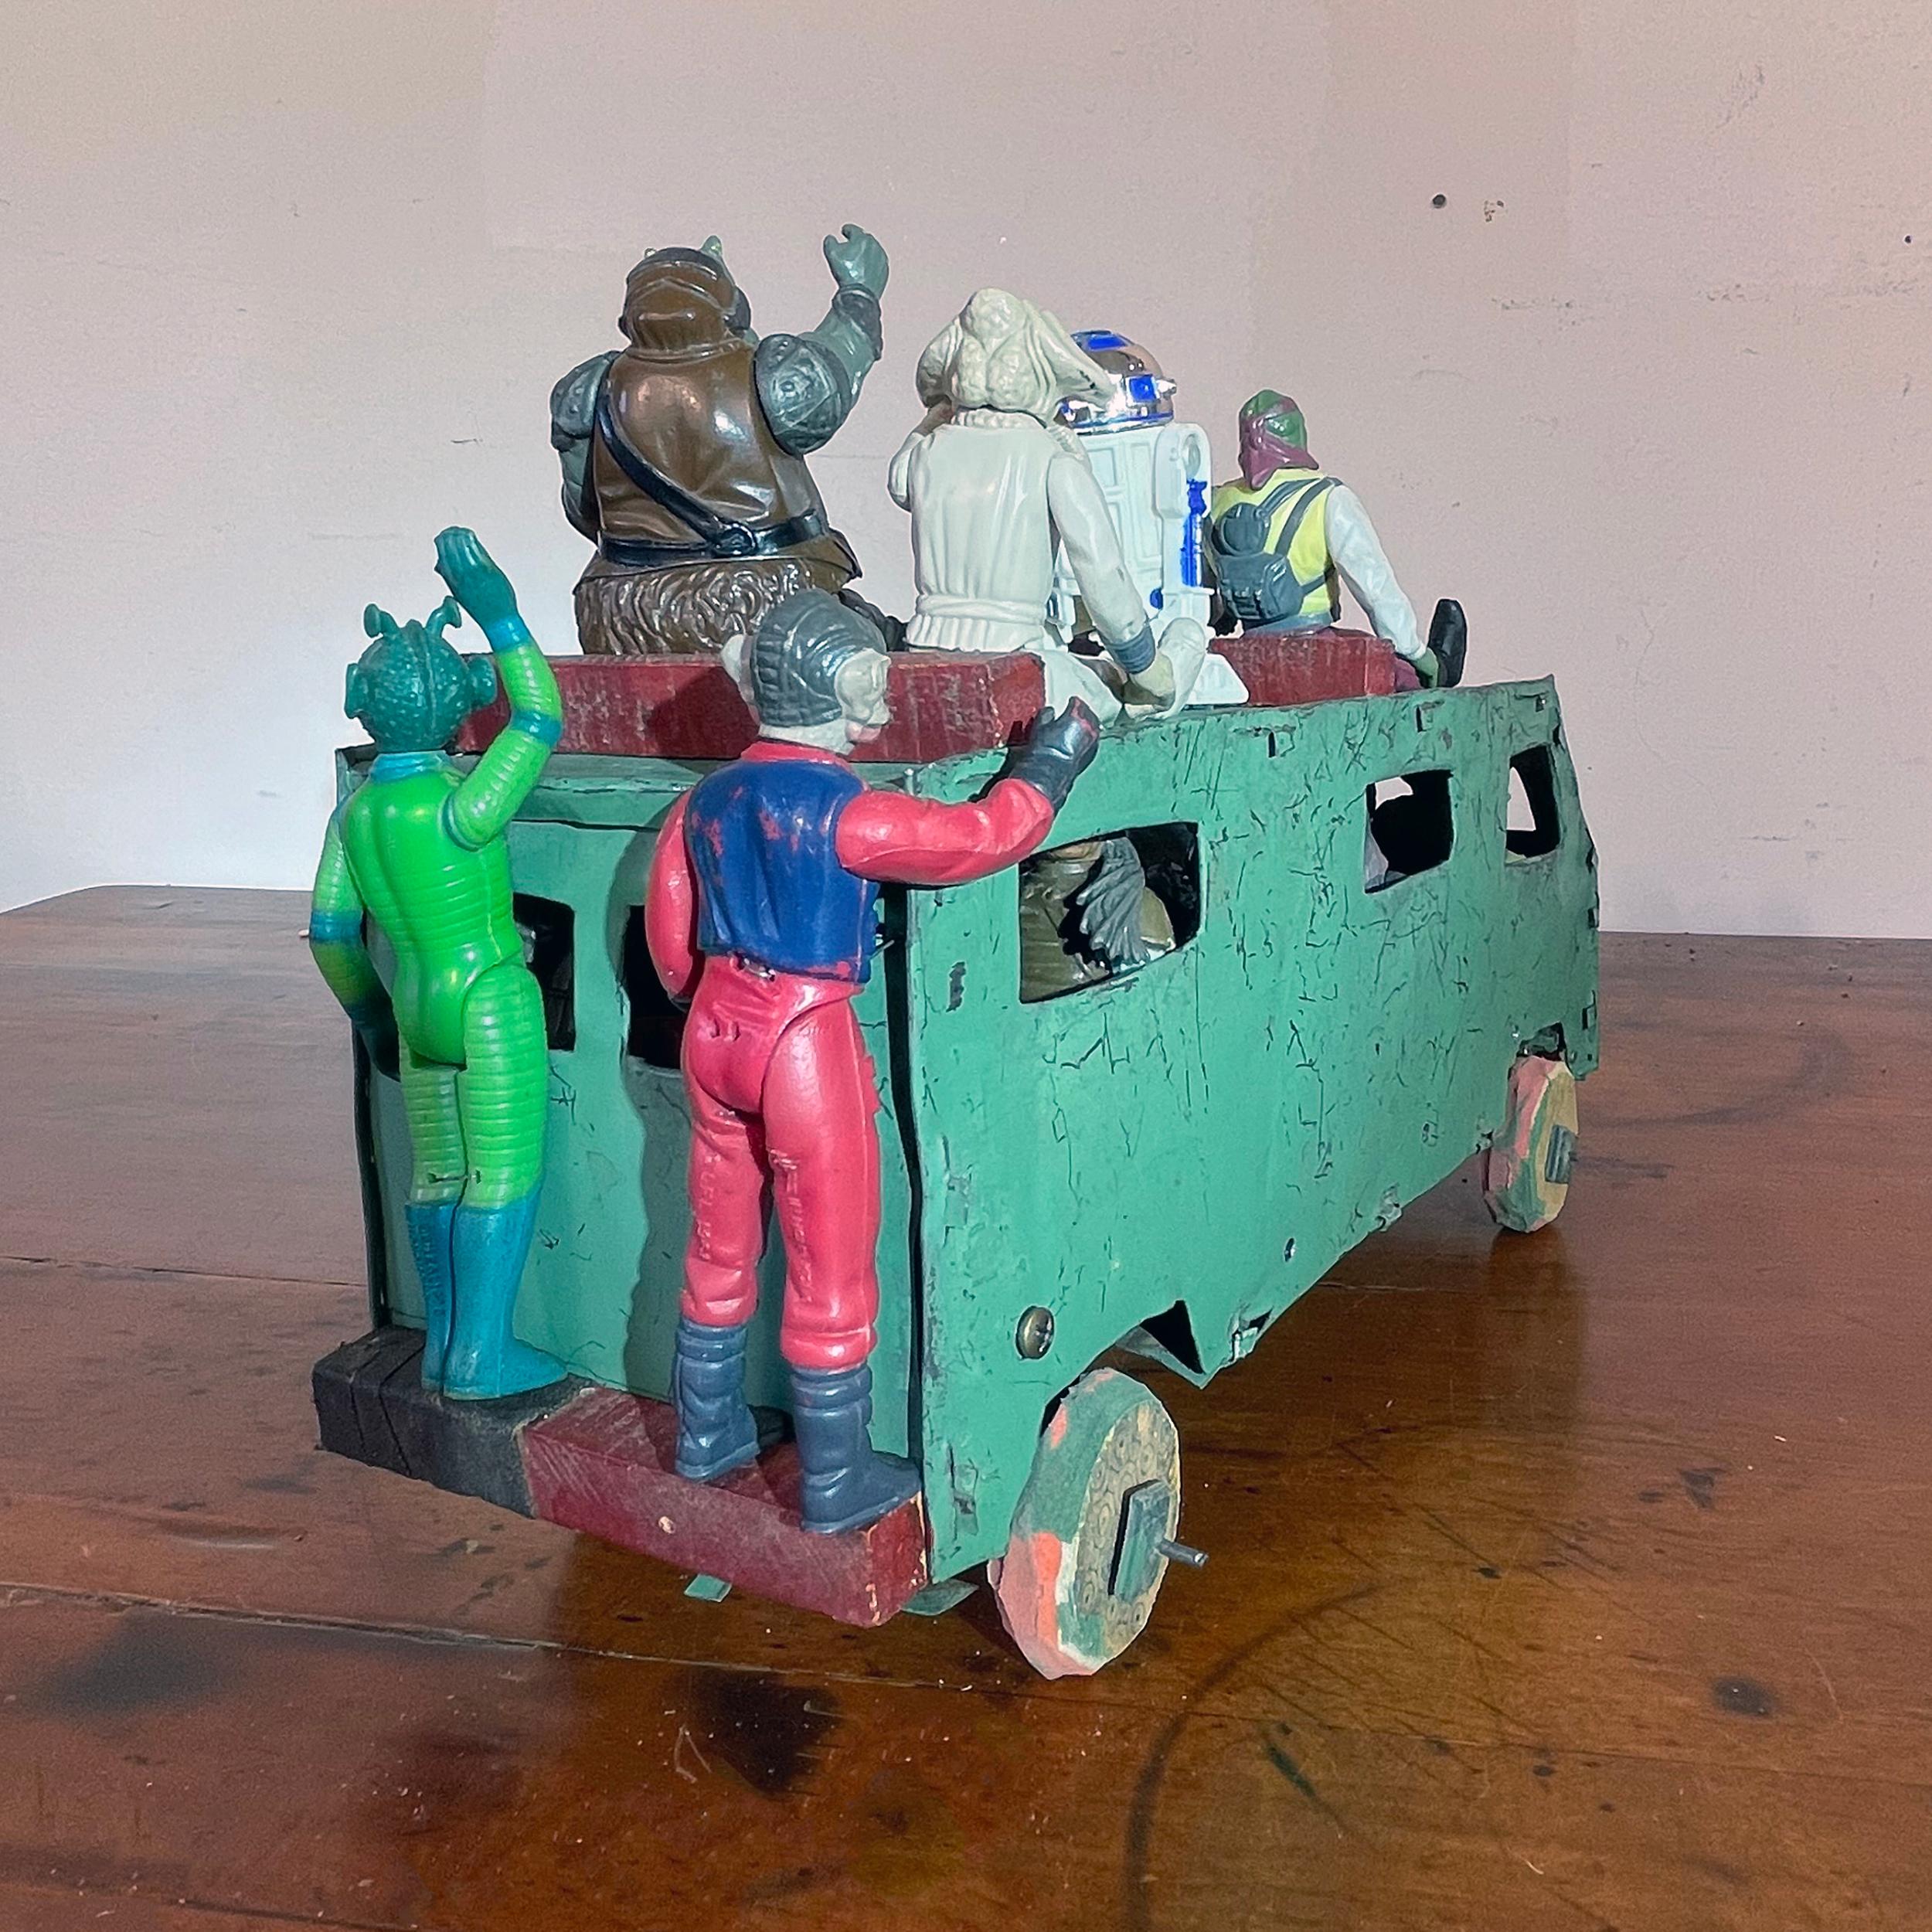  Busload of Aliens Heading for the Border - Sculpture by Kat Flyn